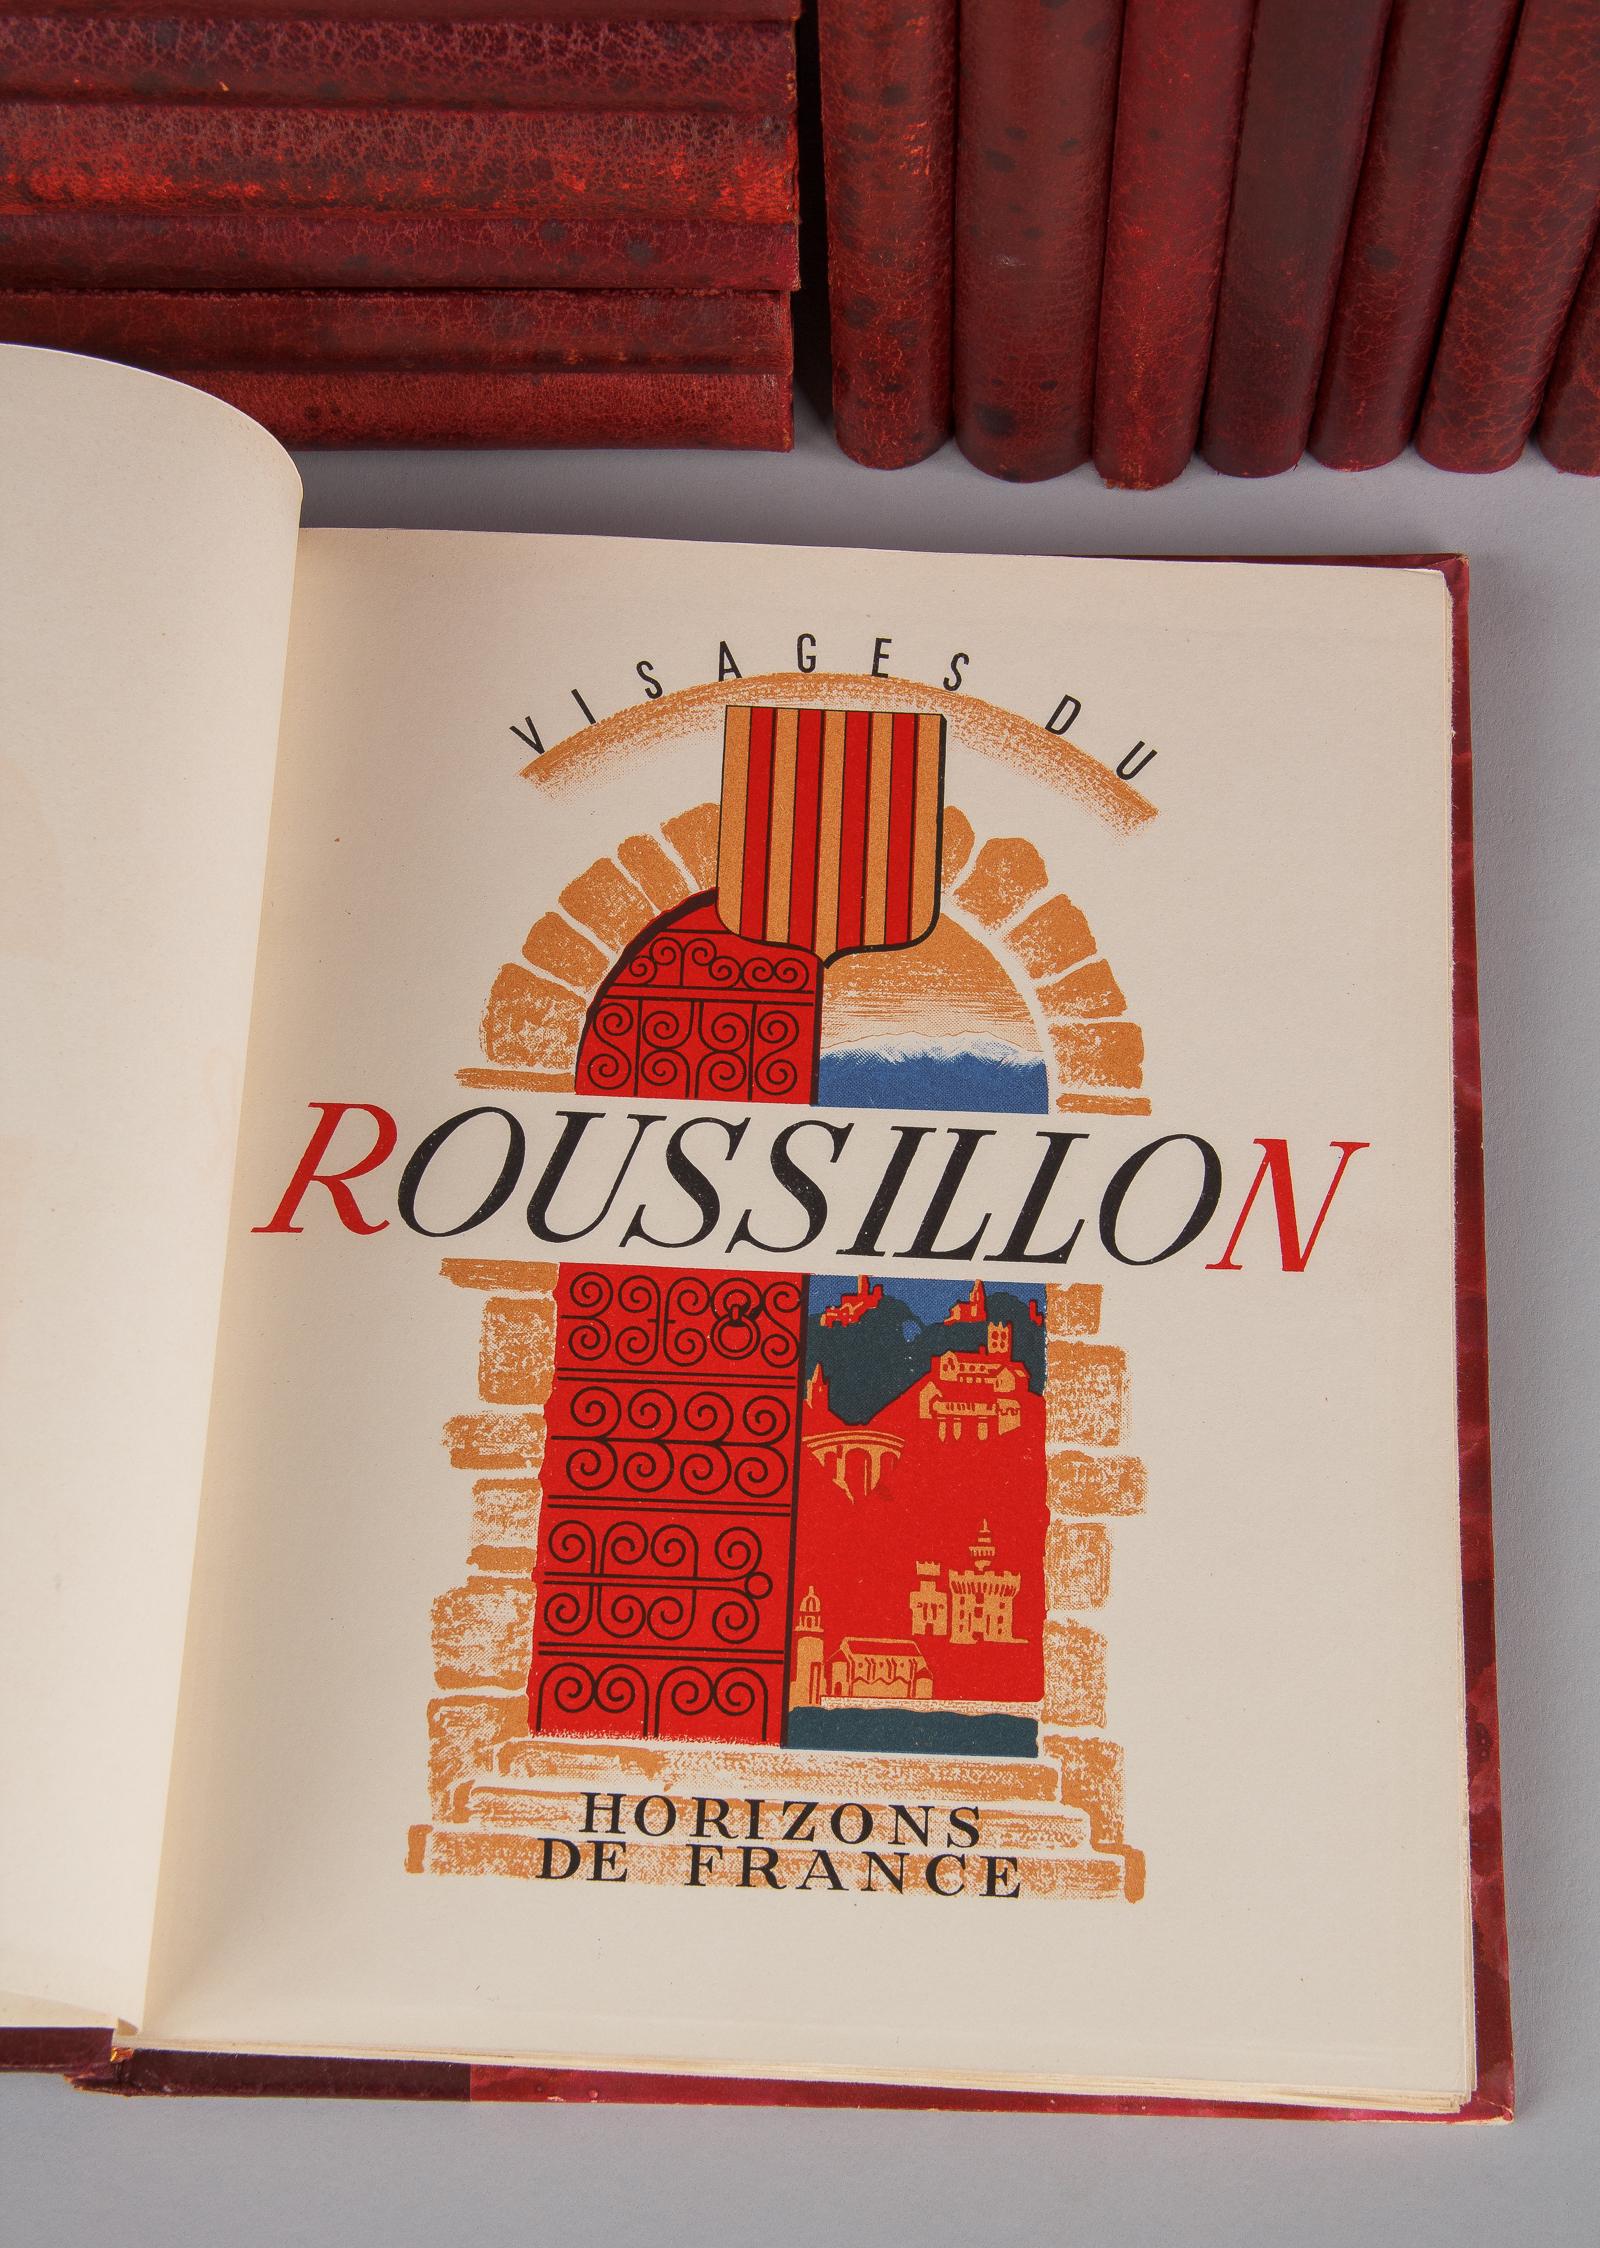 20th Century Illustrated French Books, Regions of France, 1940s-1950s